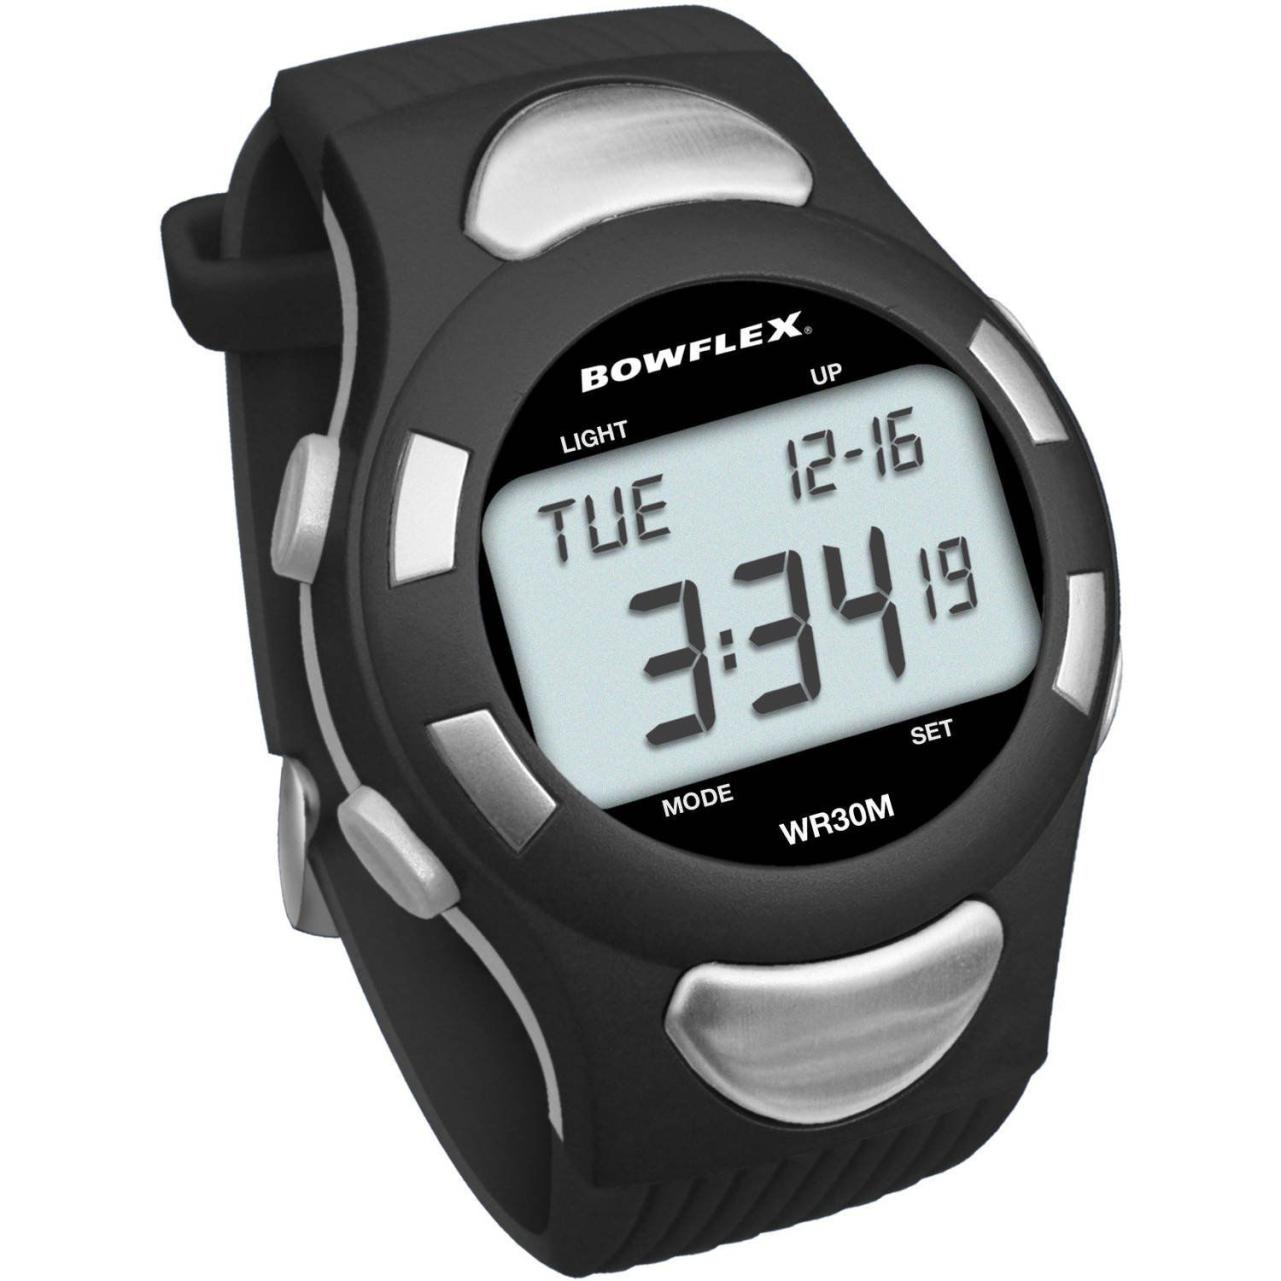 What Are Some Of The Most Popular Fitness Apps And Heart Rate Monitors On The Market?